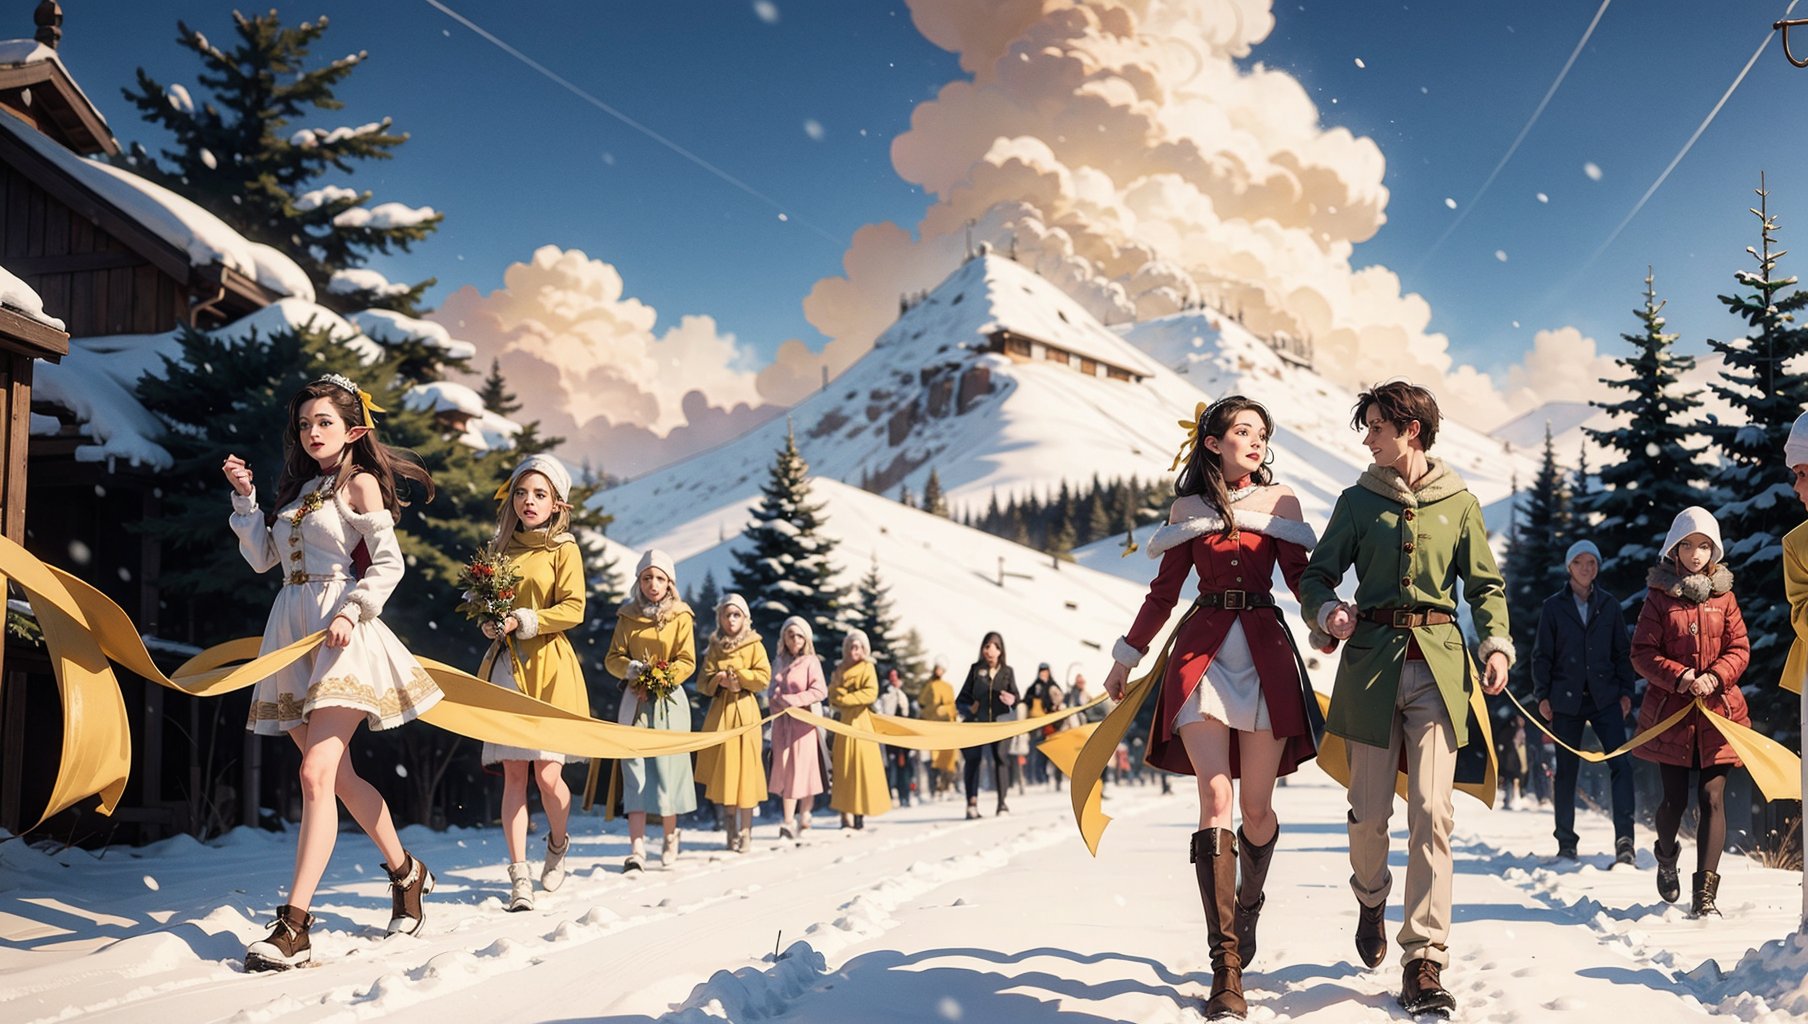 over 10 elves (all wearing yellow ribbons),walking towards viewer,mistletoe all over. Snowing,explosions in the background,